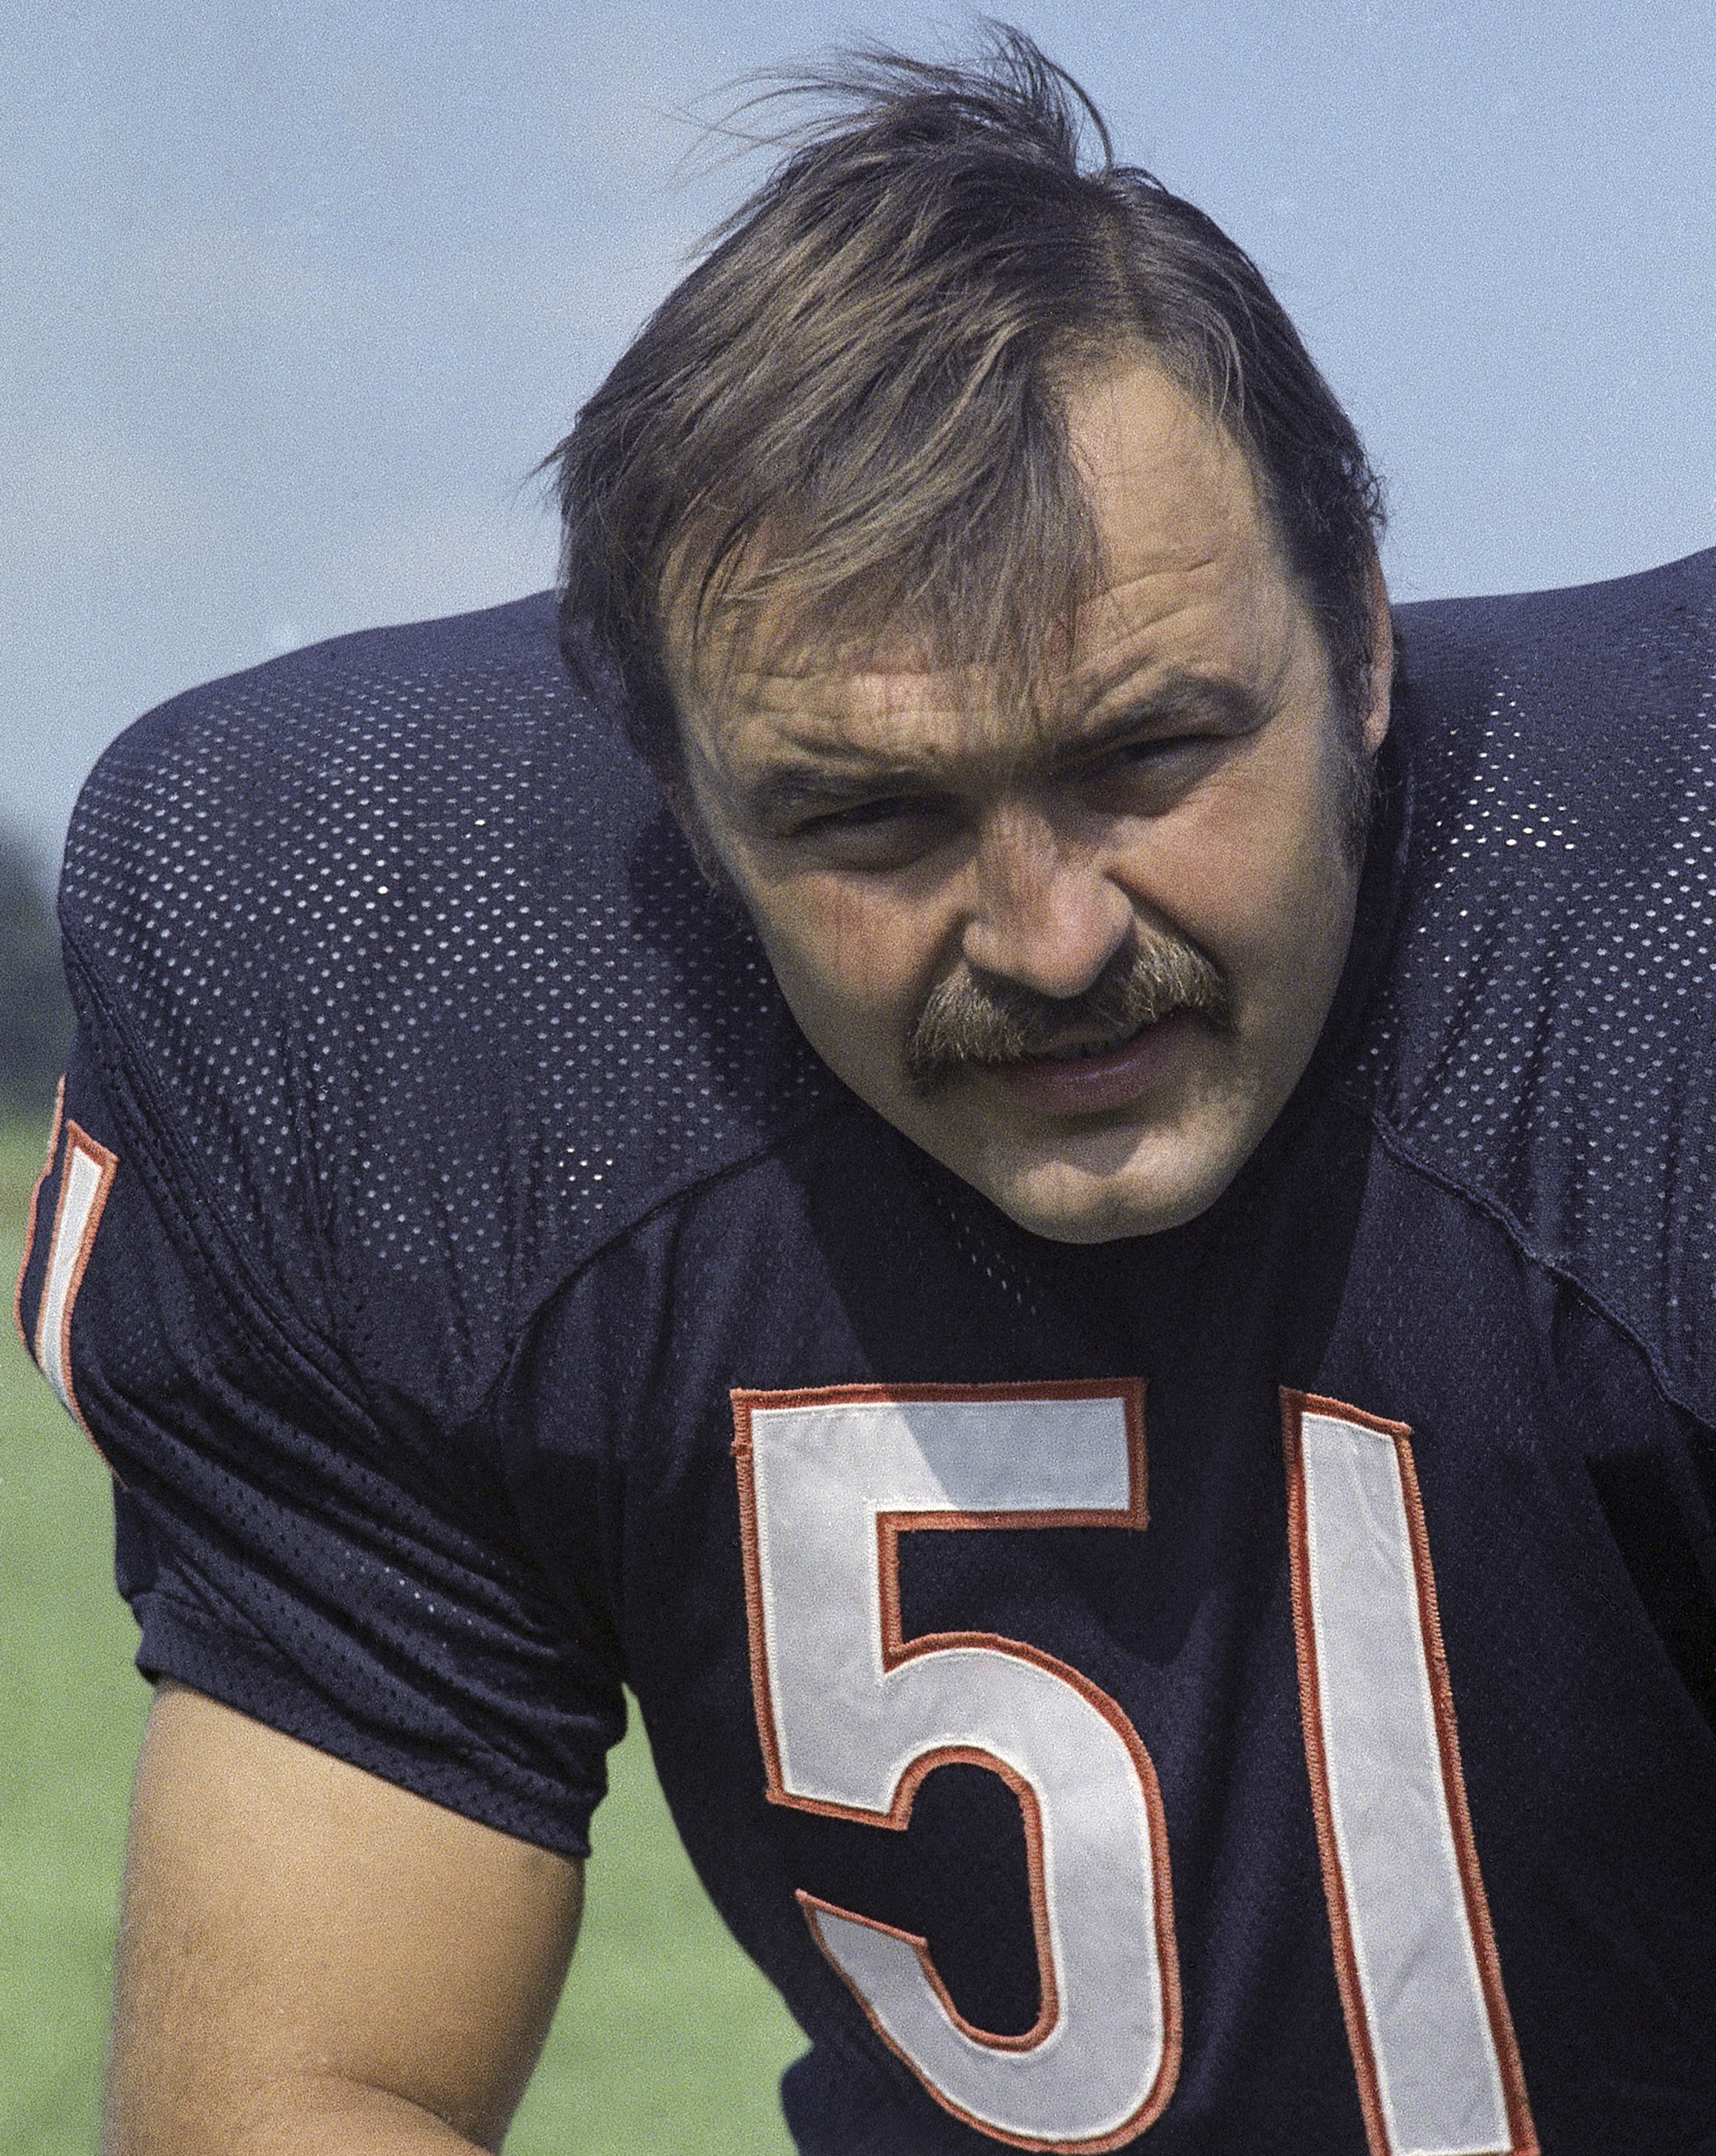 FILE - Chicago Bears linebacker Dick Butkus poses for a photo in 1973. Butkus, a fearsome middle linebacker for the Bears, has died, the team announced Thursday, Oct. 5, 2023. He was 80. According to a statement released by the team, Butkus' family confirmed that he died in his sleep overnight at his home in Malibu, Calif.